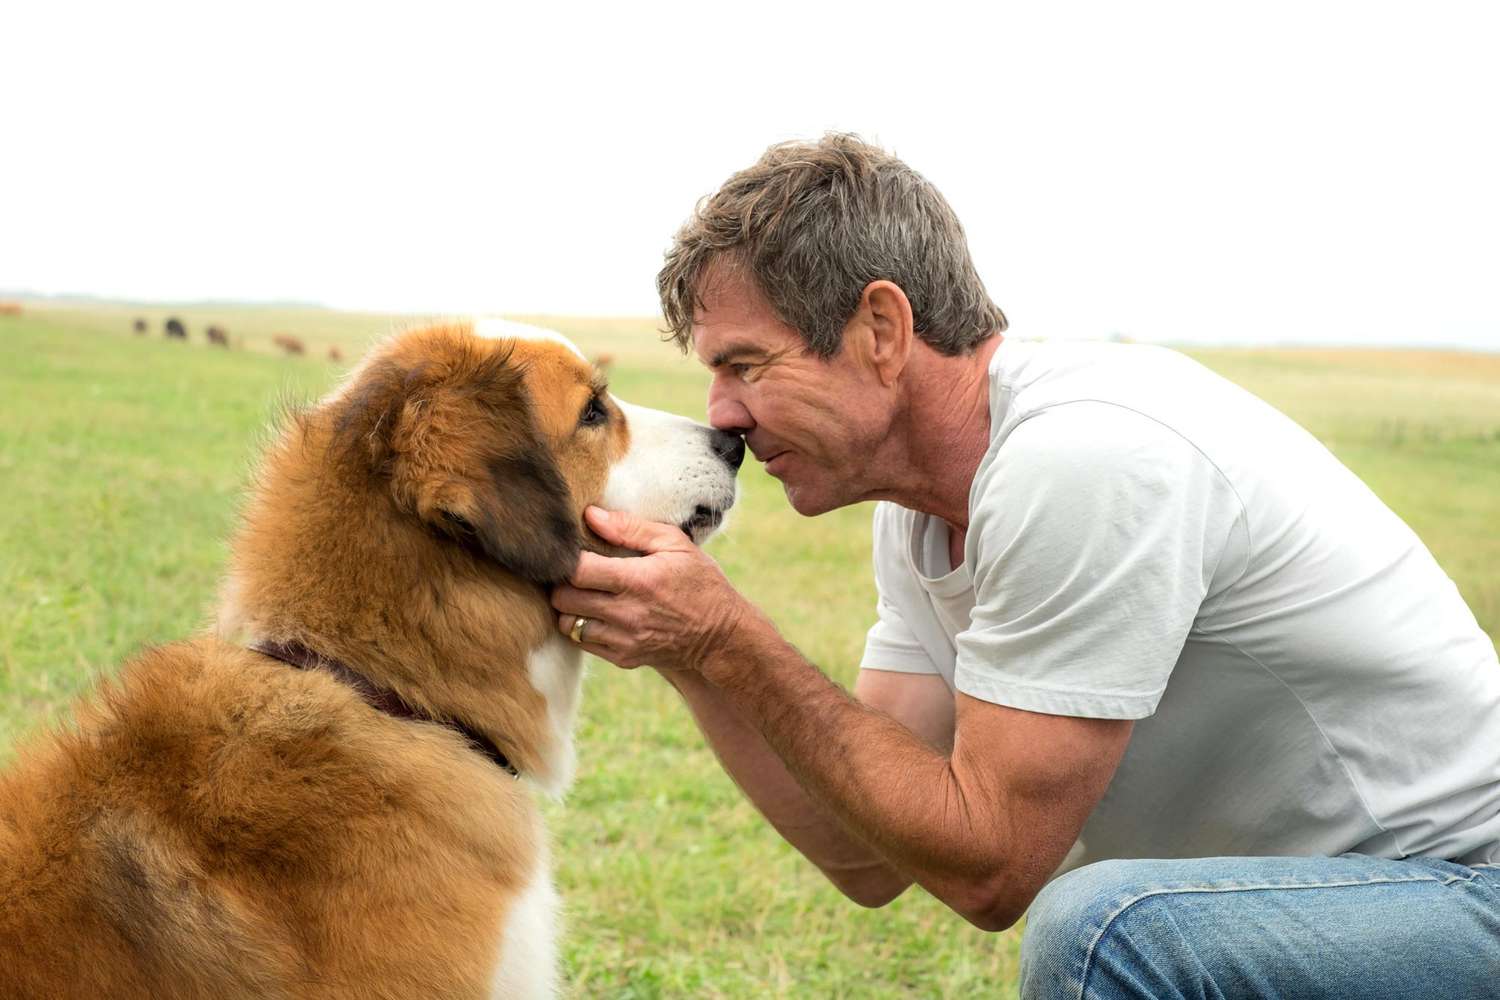 Dog's Purpose video mischaracterized incident, investigation finds 